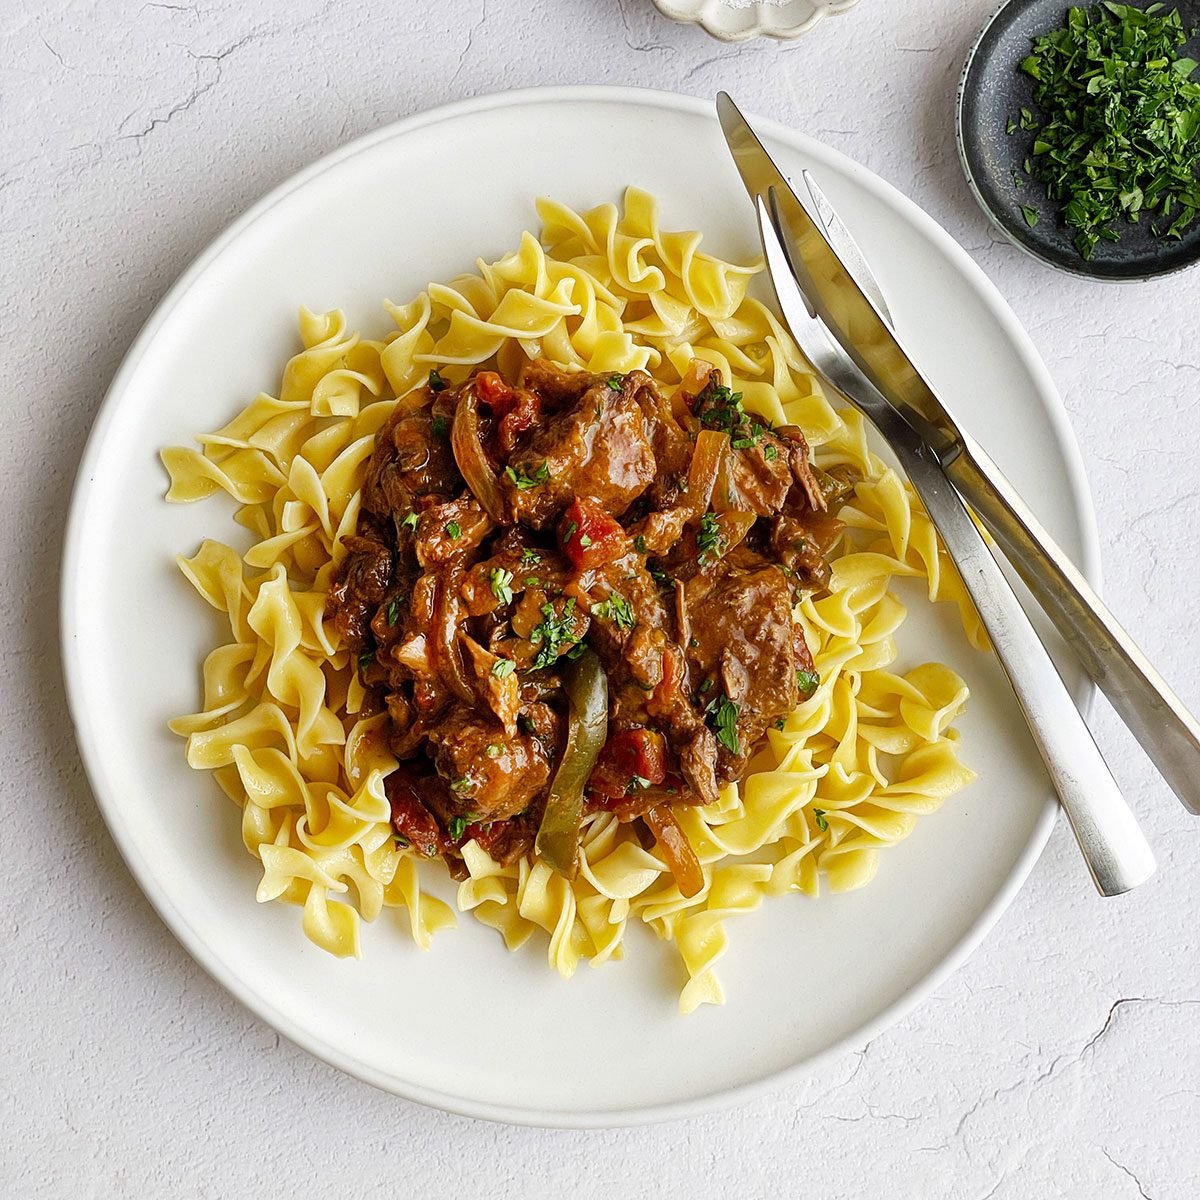 Taste of Home's Round Steak recipe on a bed of egg noodles